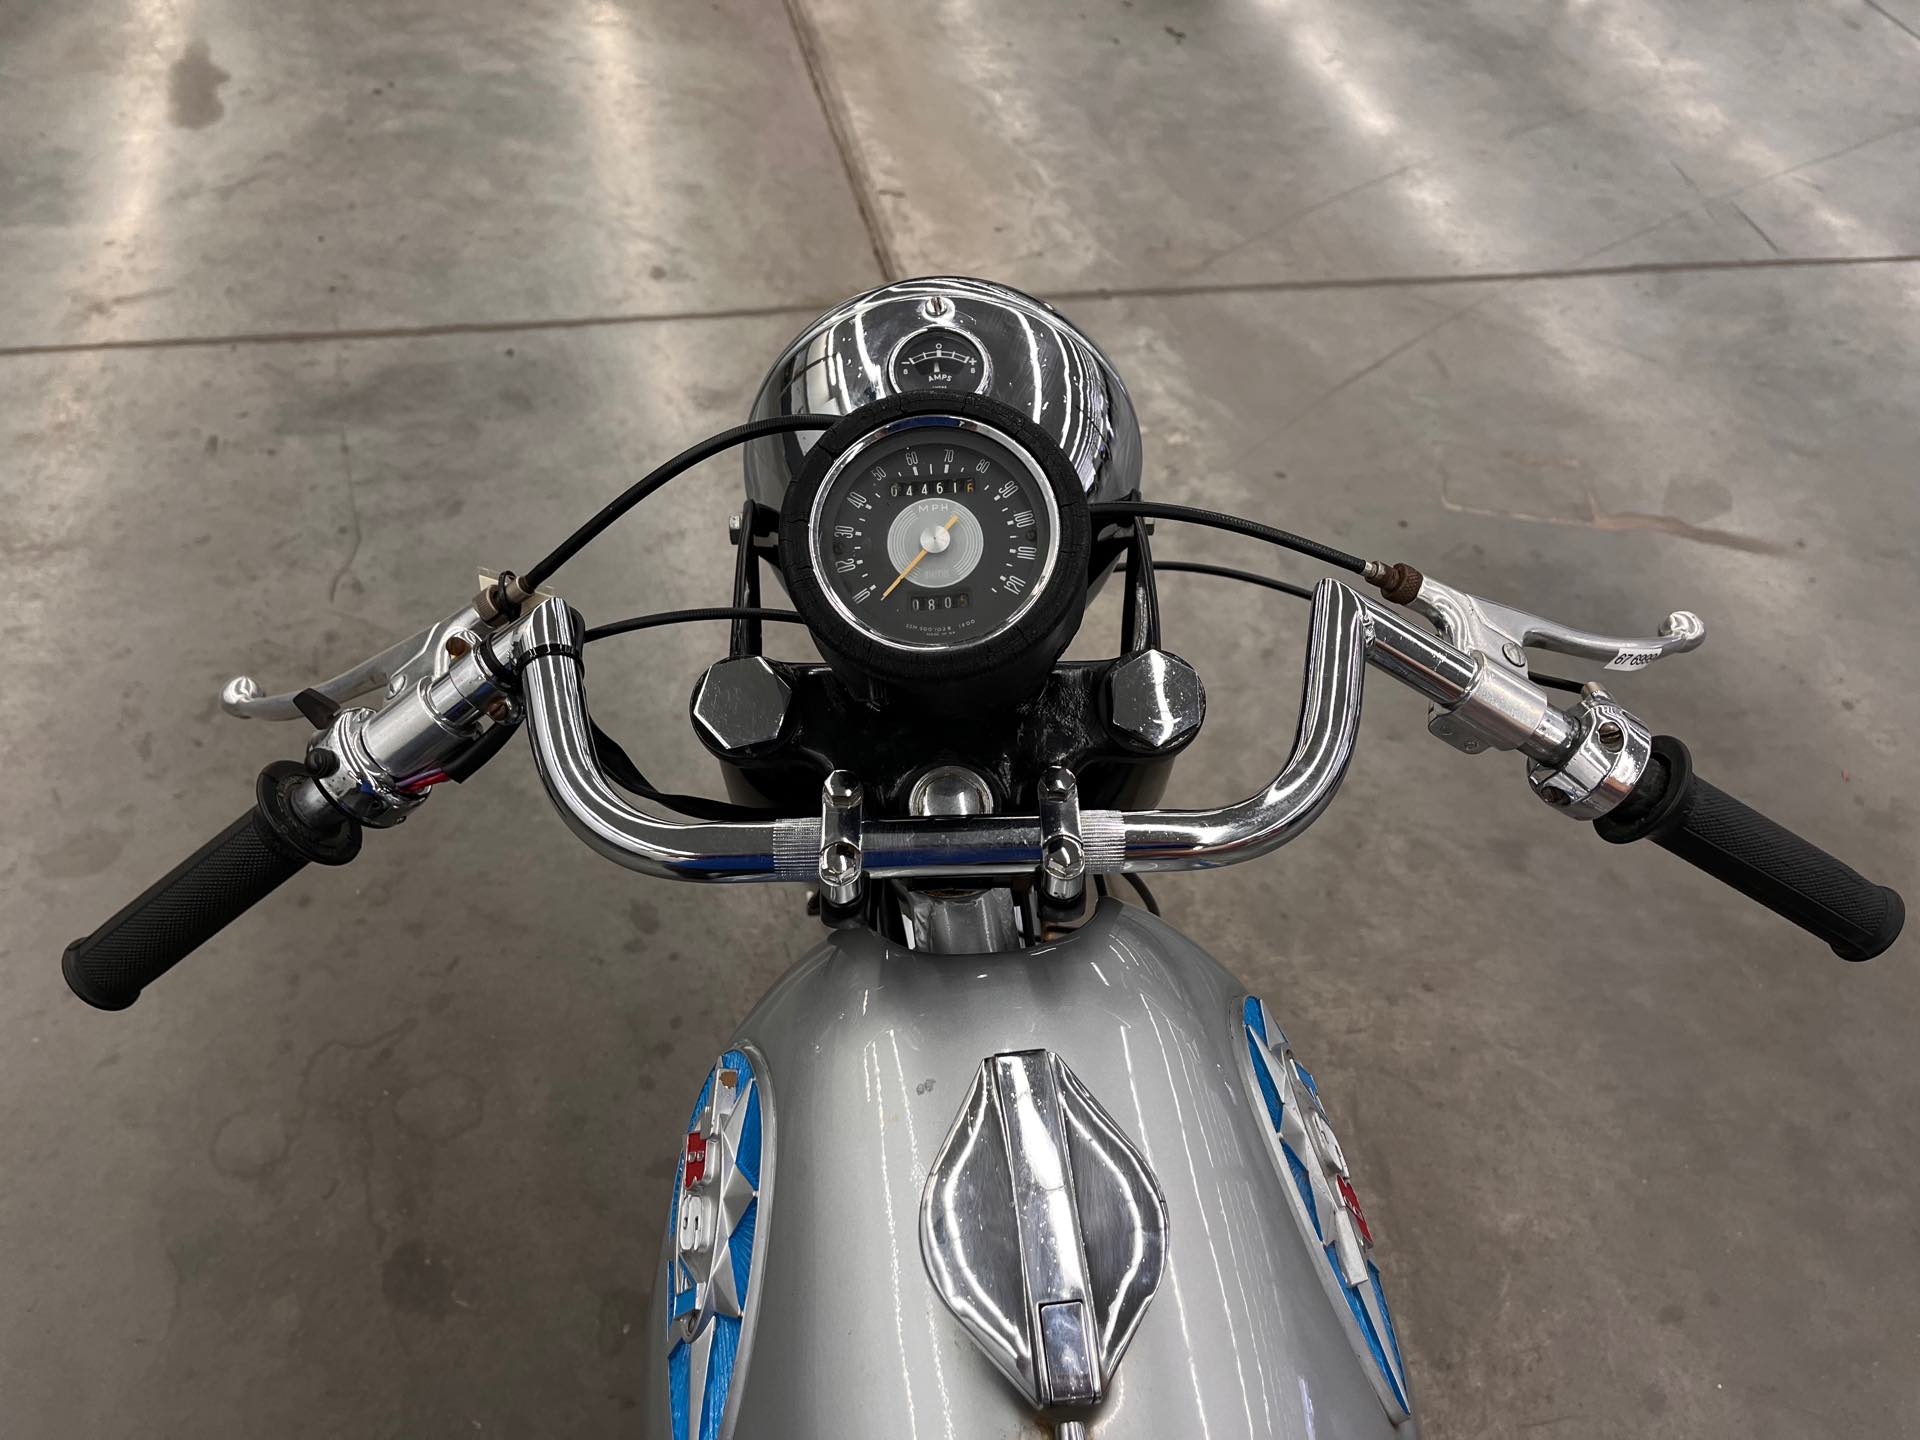 1967 BSA VICTOR at Aces Motorcycles - Denver